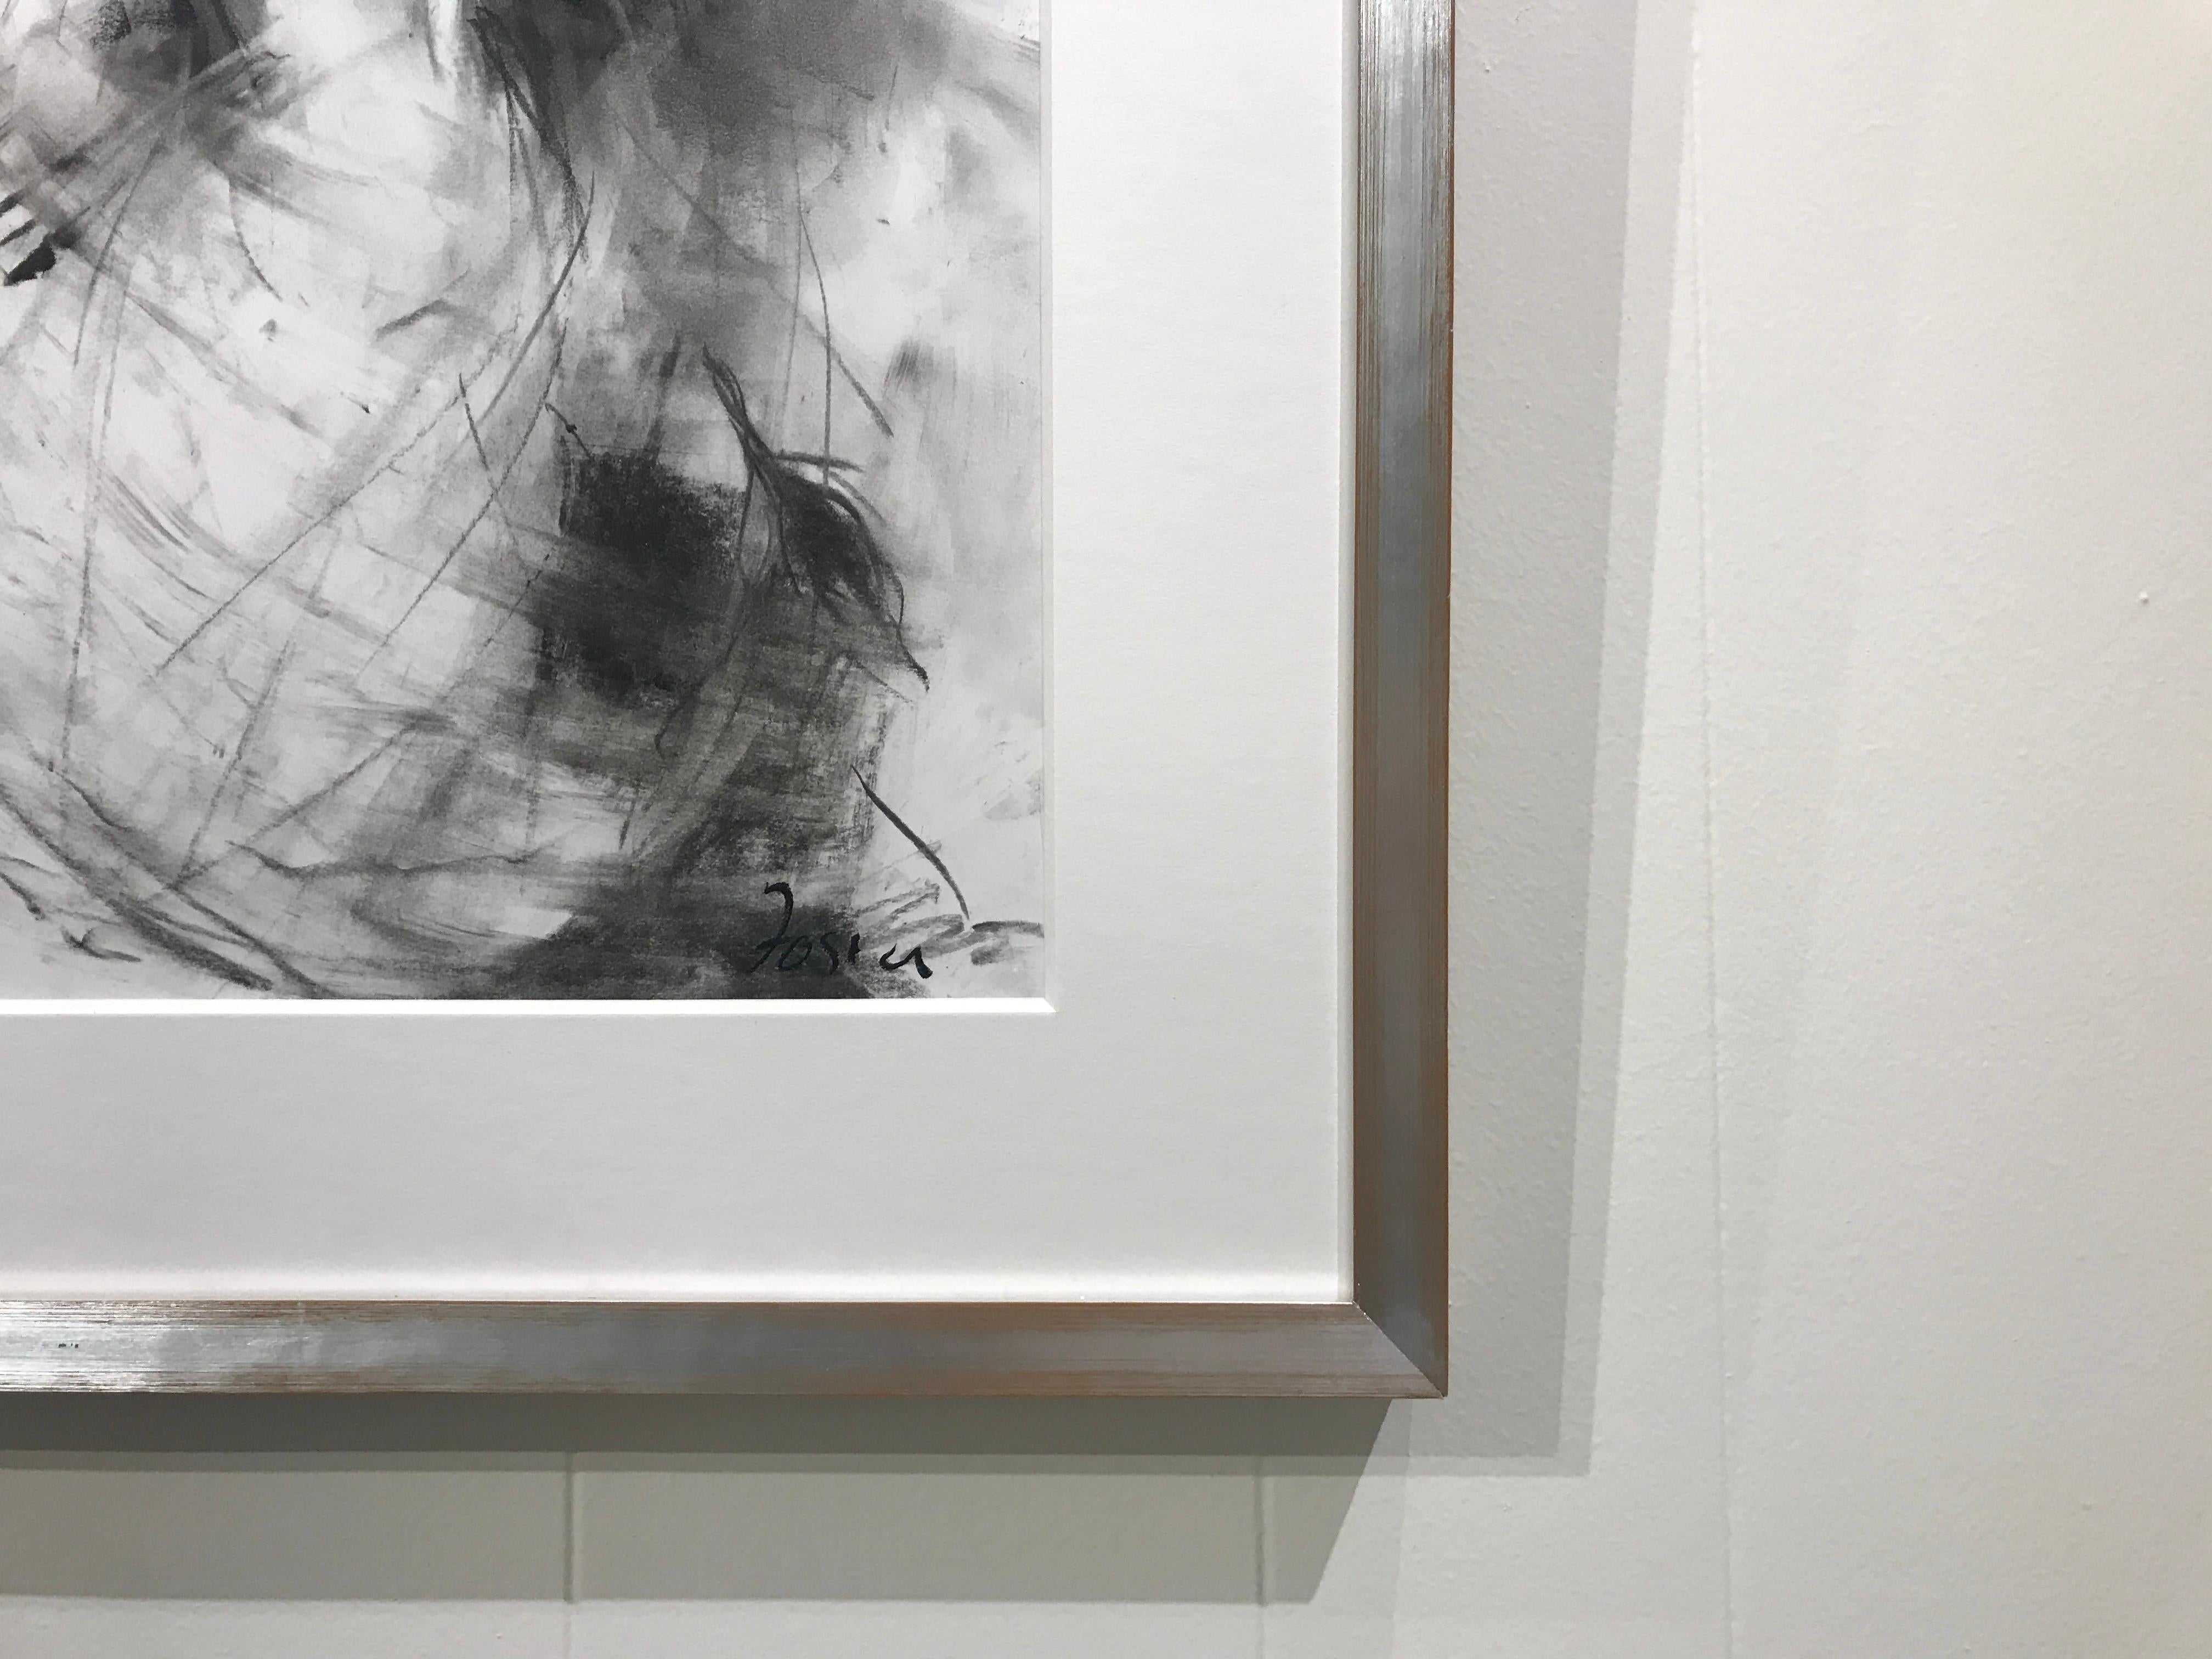 Currents II by Gail Foster 2018 Petite Framed Charcoal on Paper Figurative 3